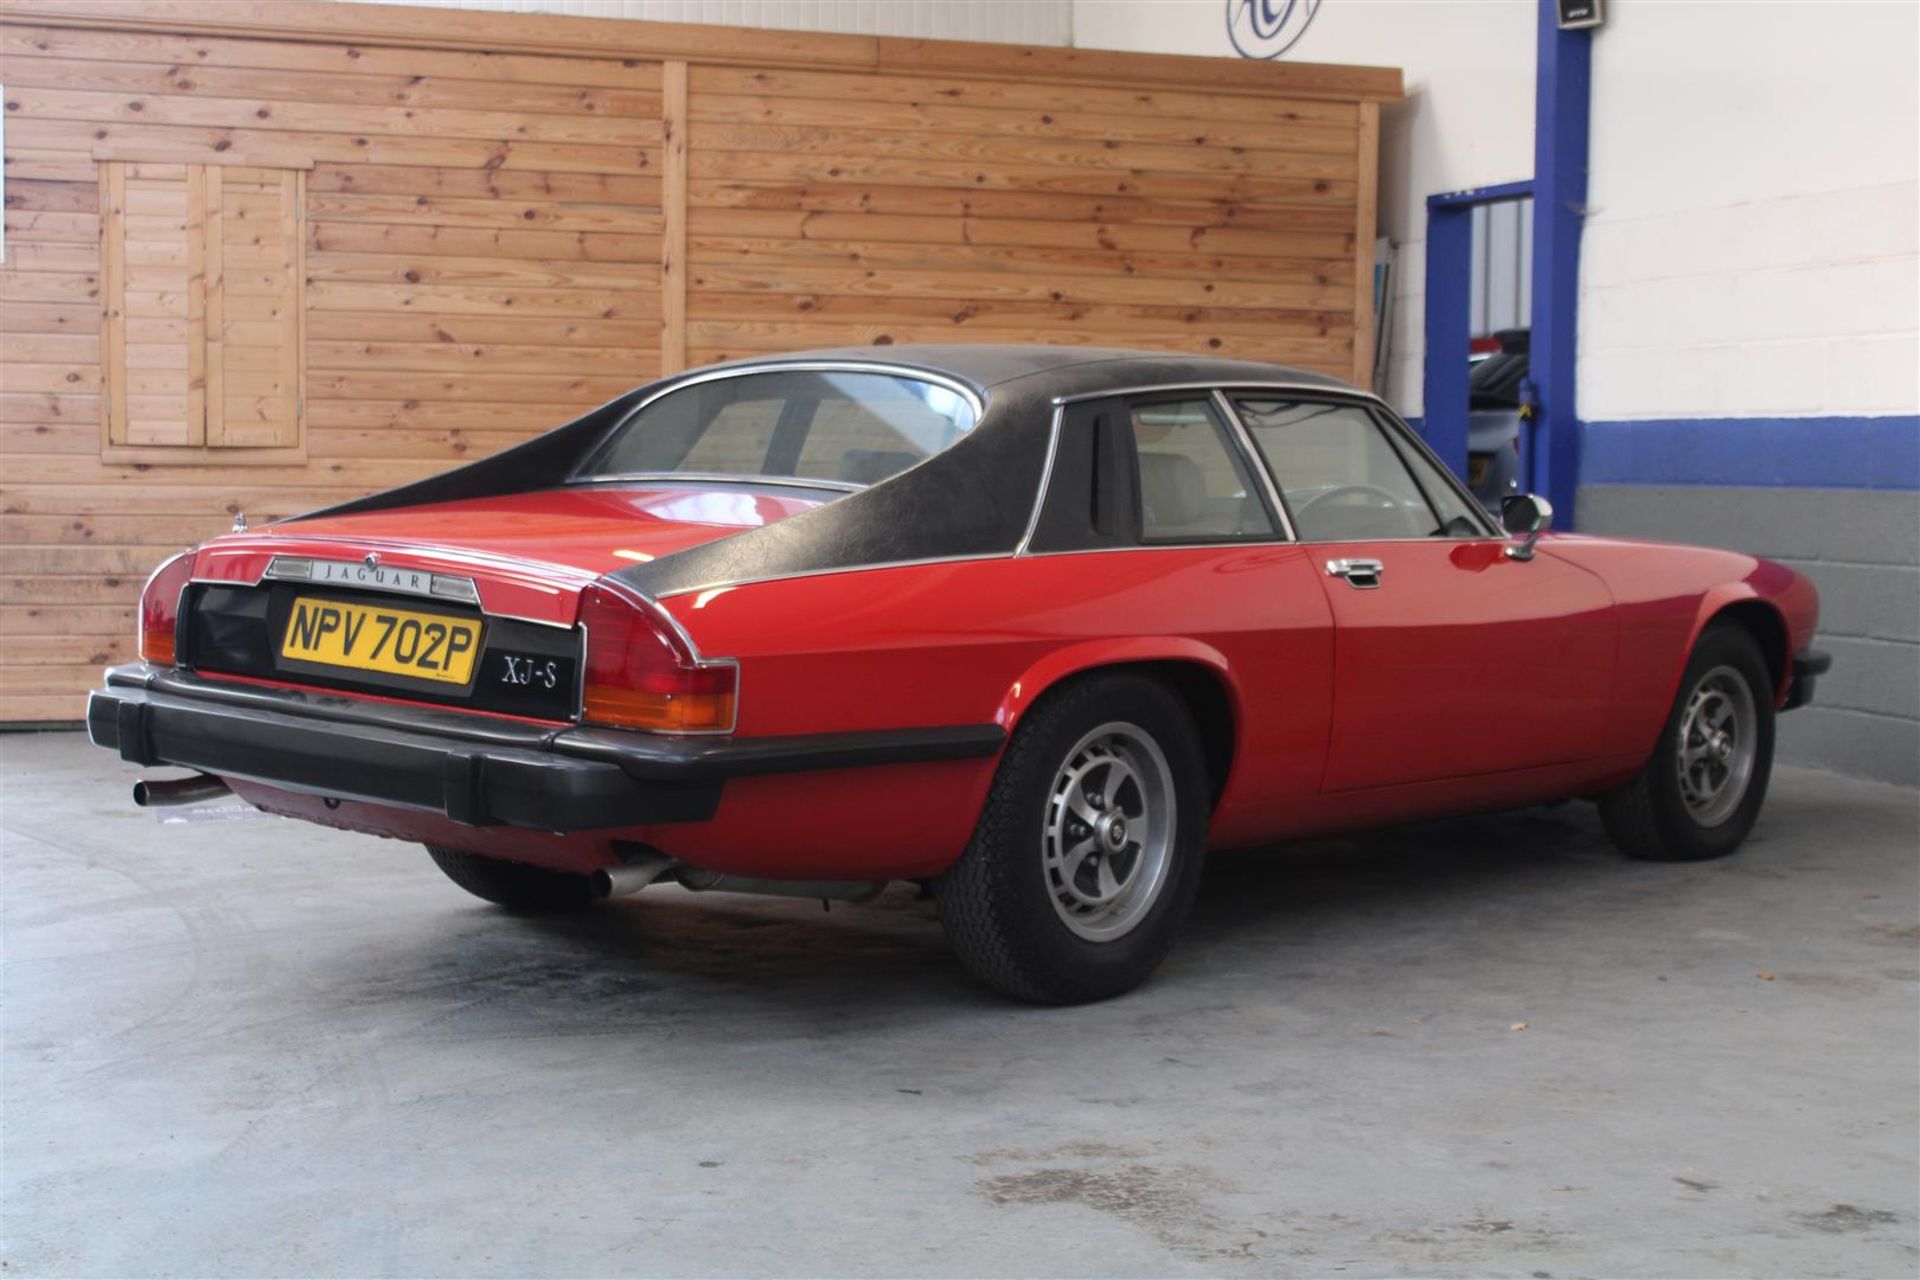 1976 Jaguar XJ-S 5.3 V12 Coupe Auto 29,030 miles from new - Image 19 of 23